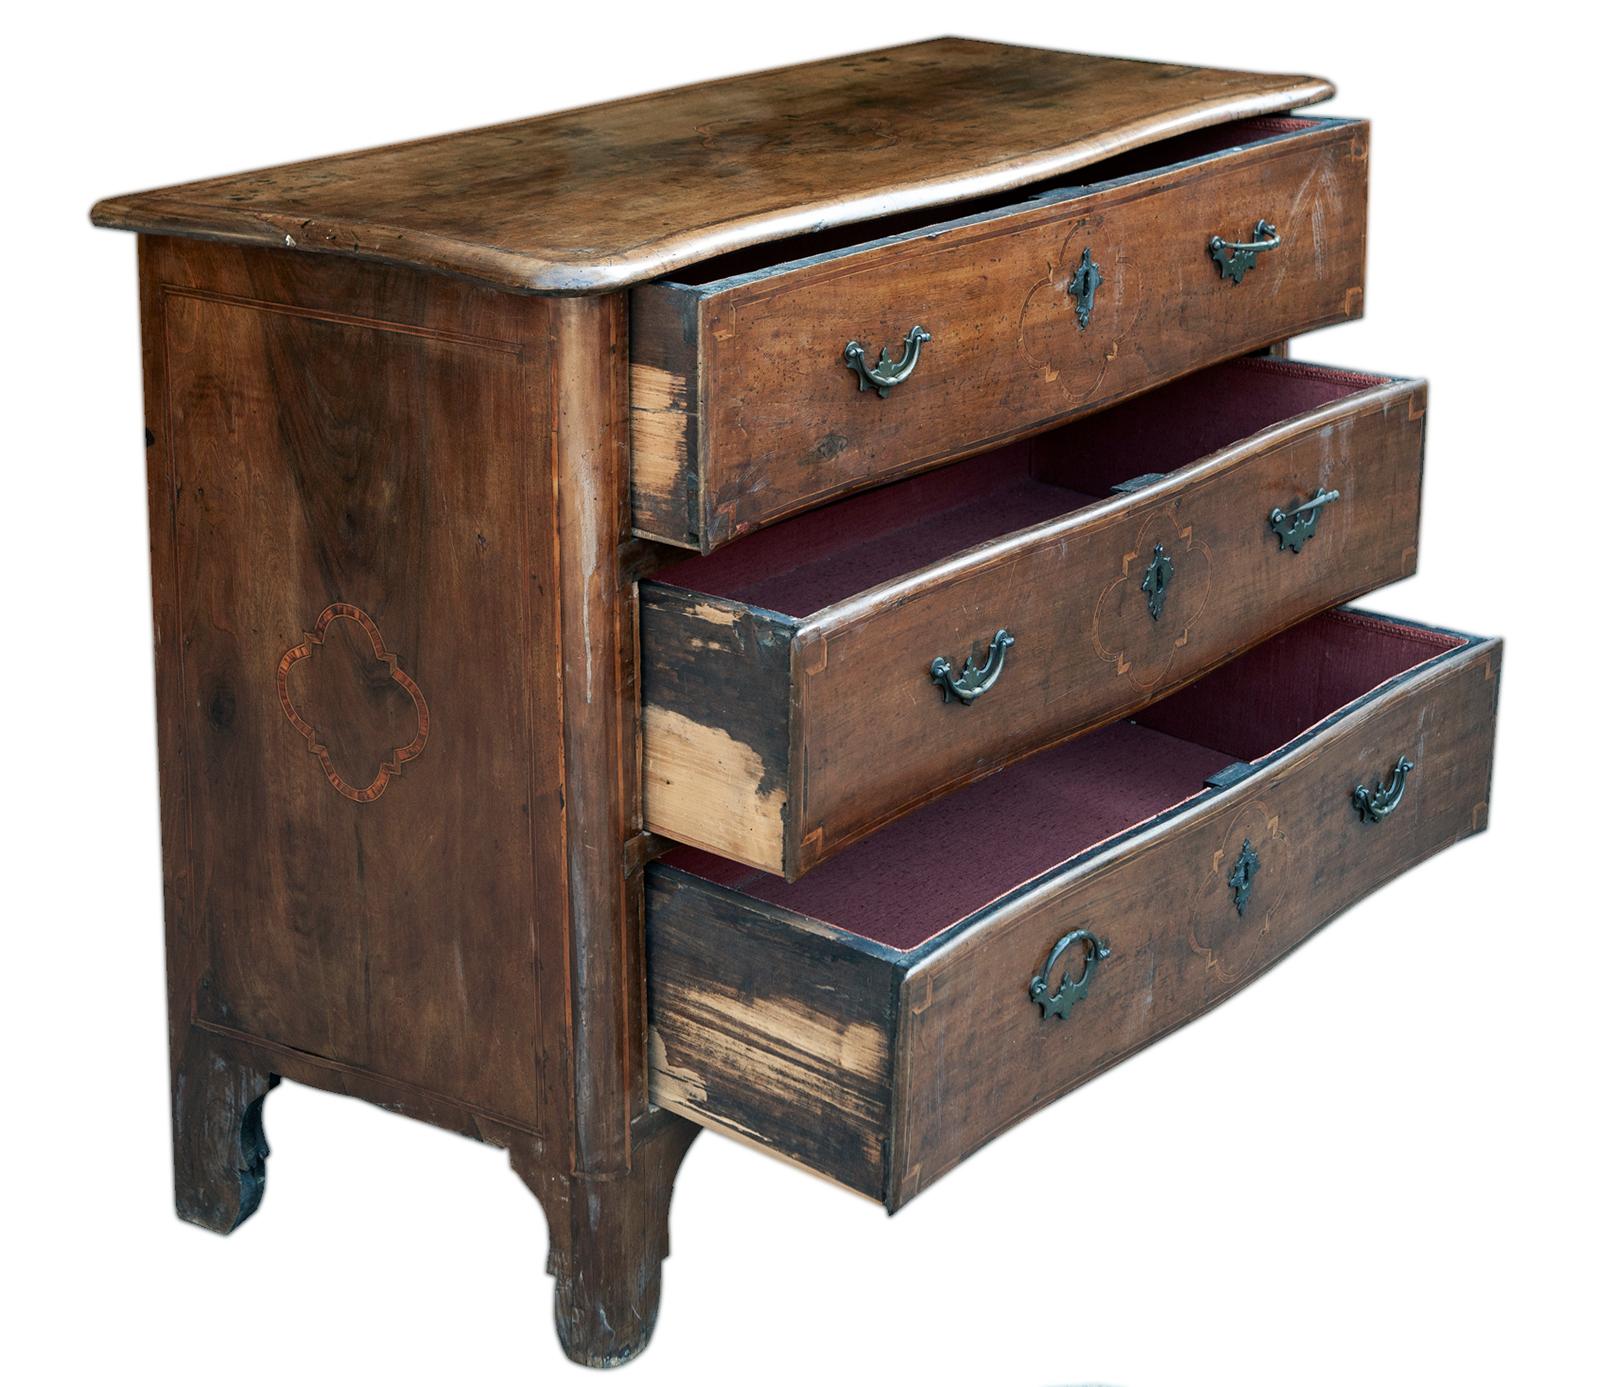 18th Century Inlaid Italian Walnut Three Drawer Chest/ Lined Drawers In Good Condition For Sale In Malibu, CA